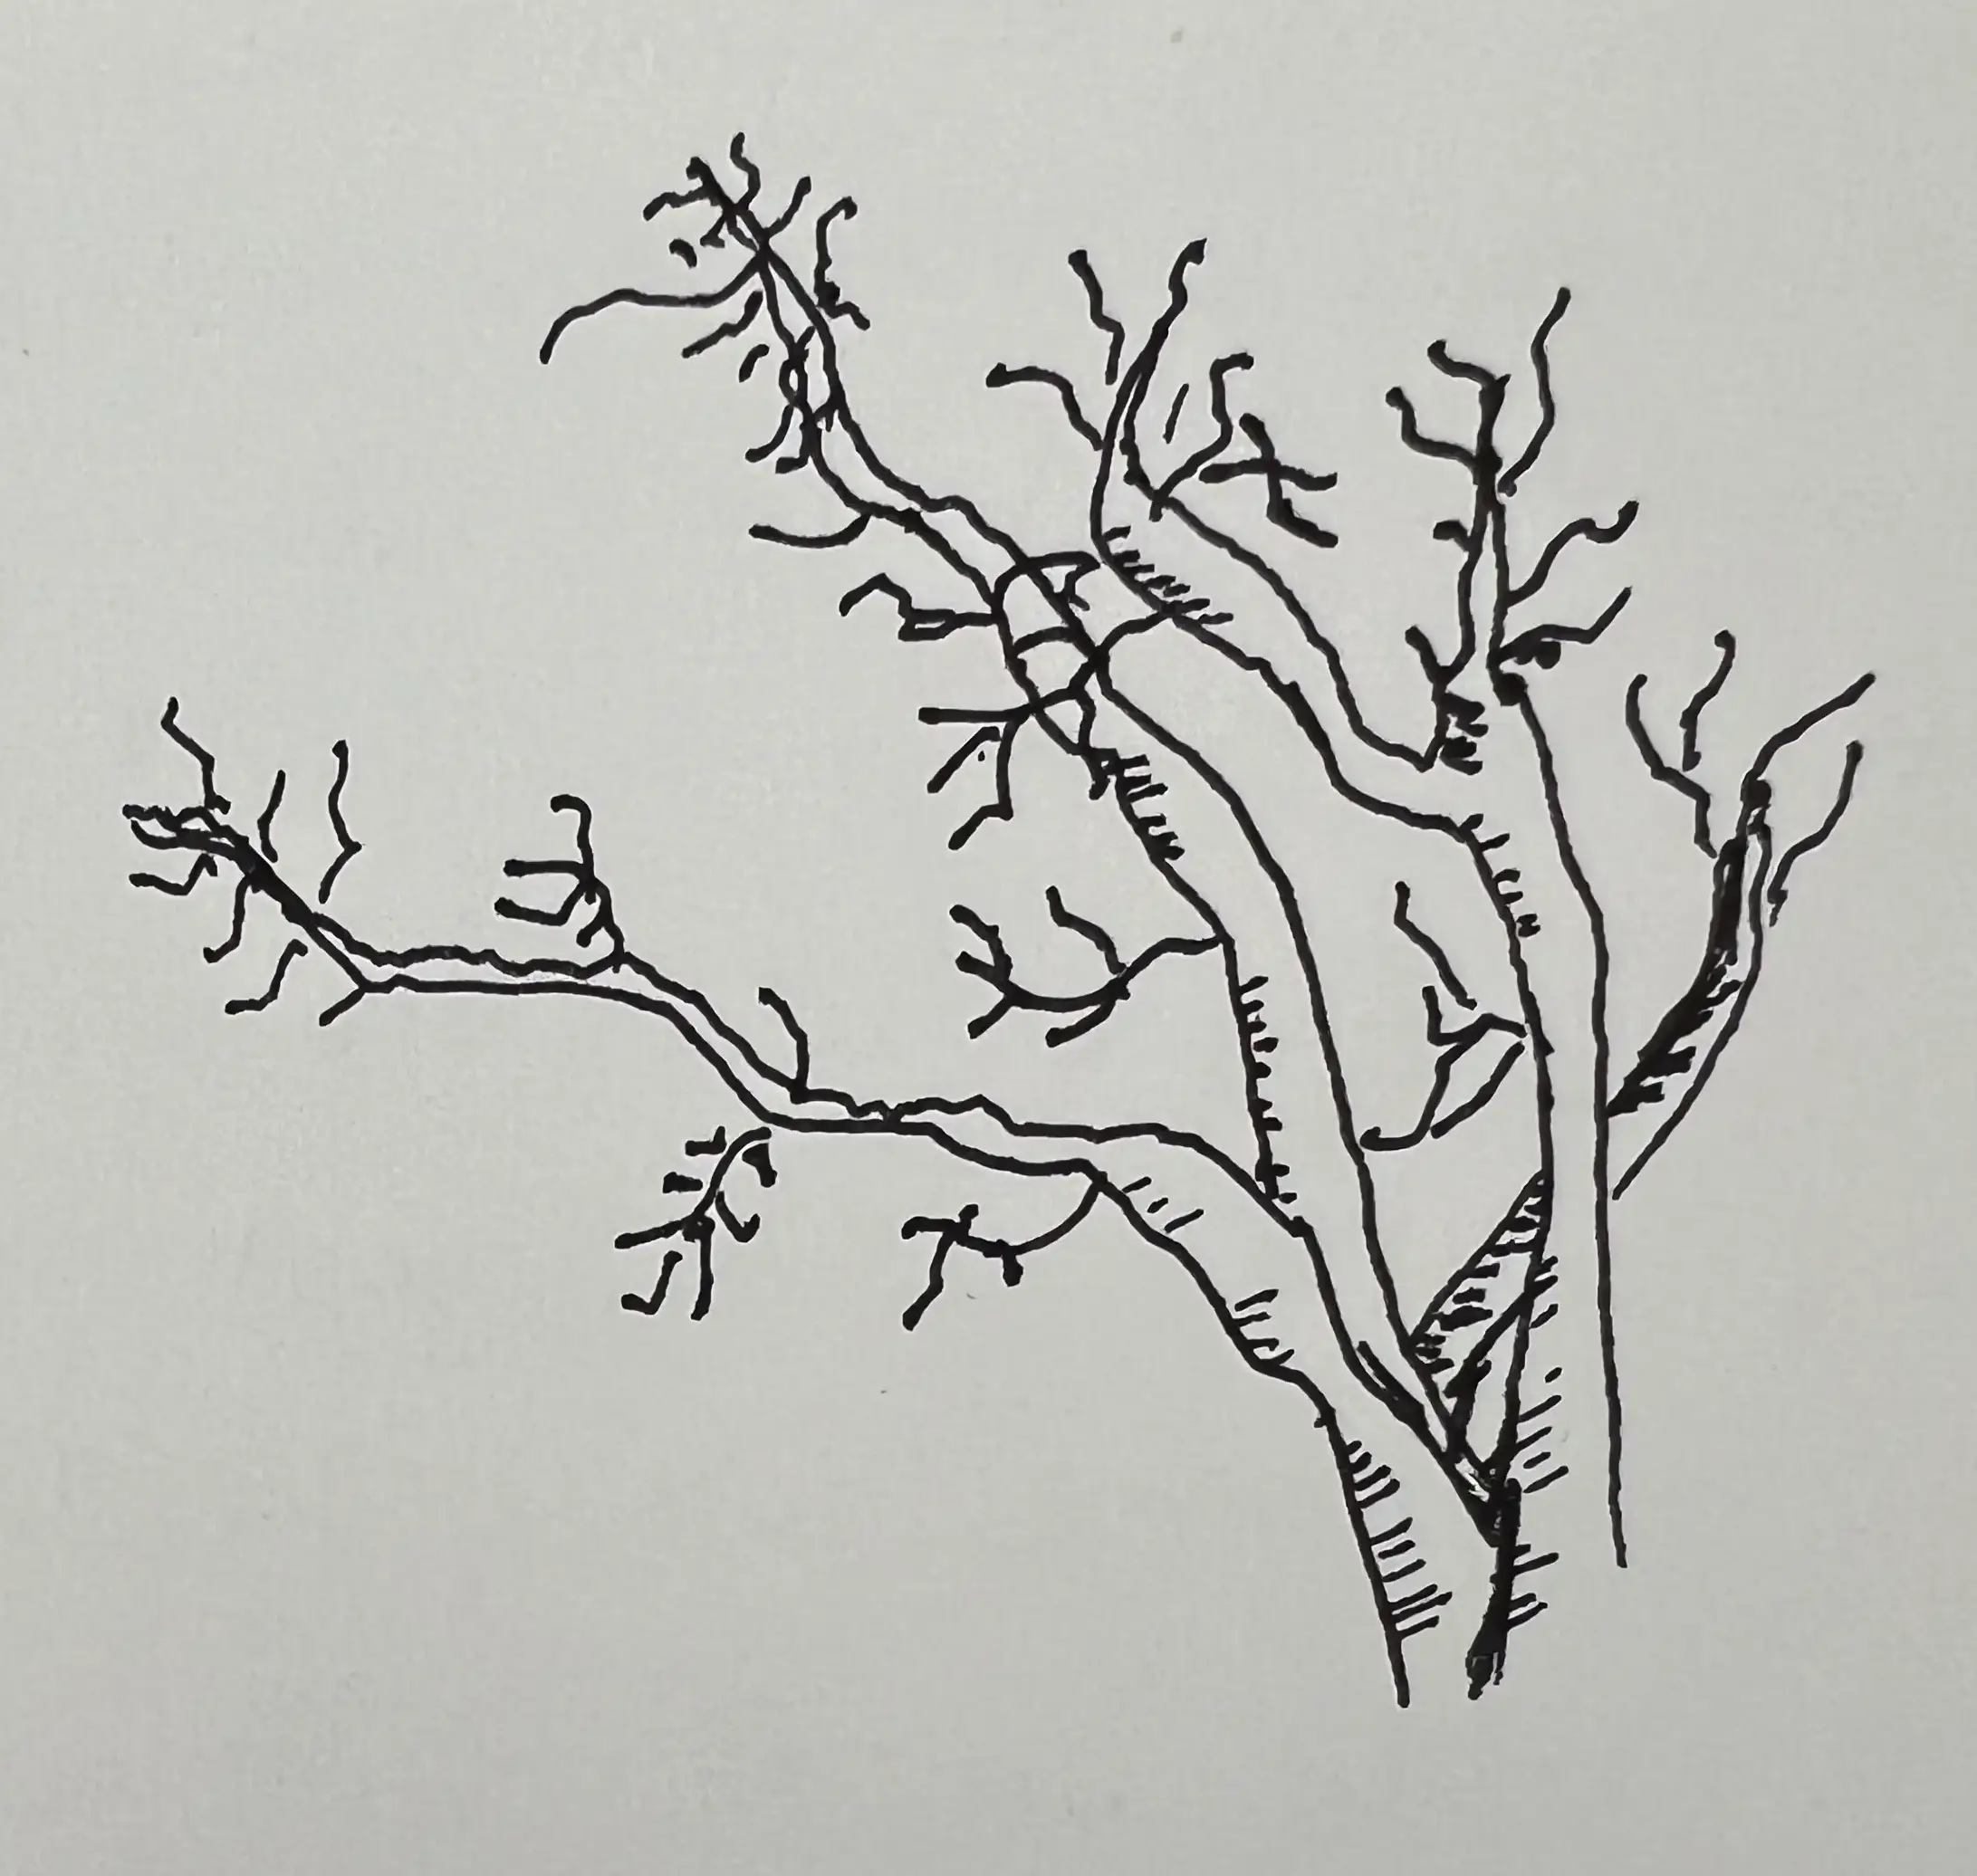 drawing of the tree outside my window